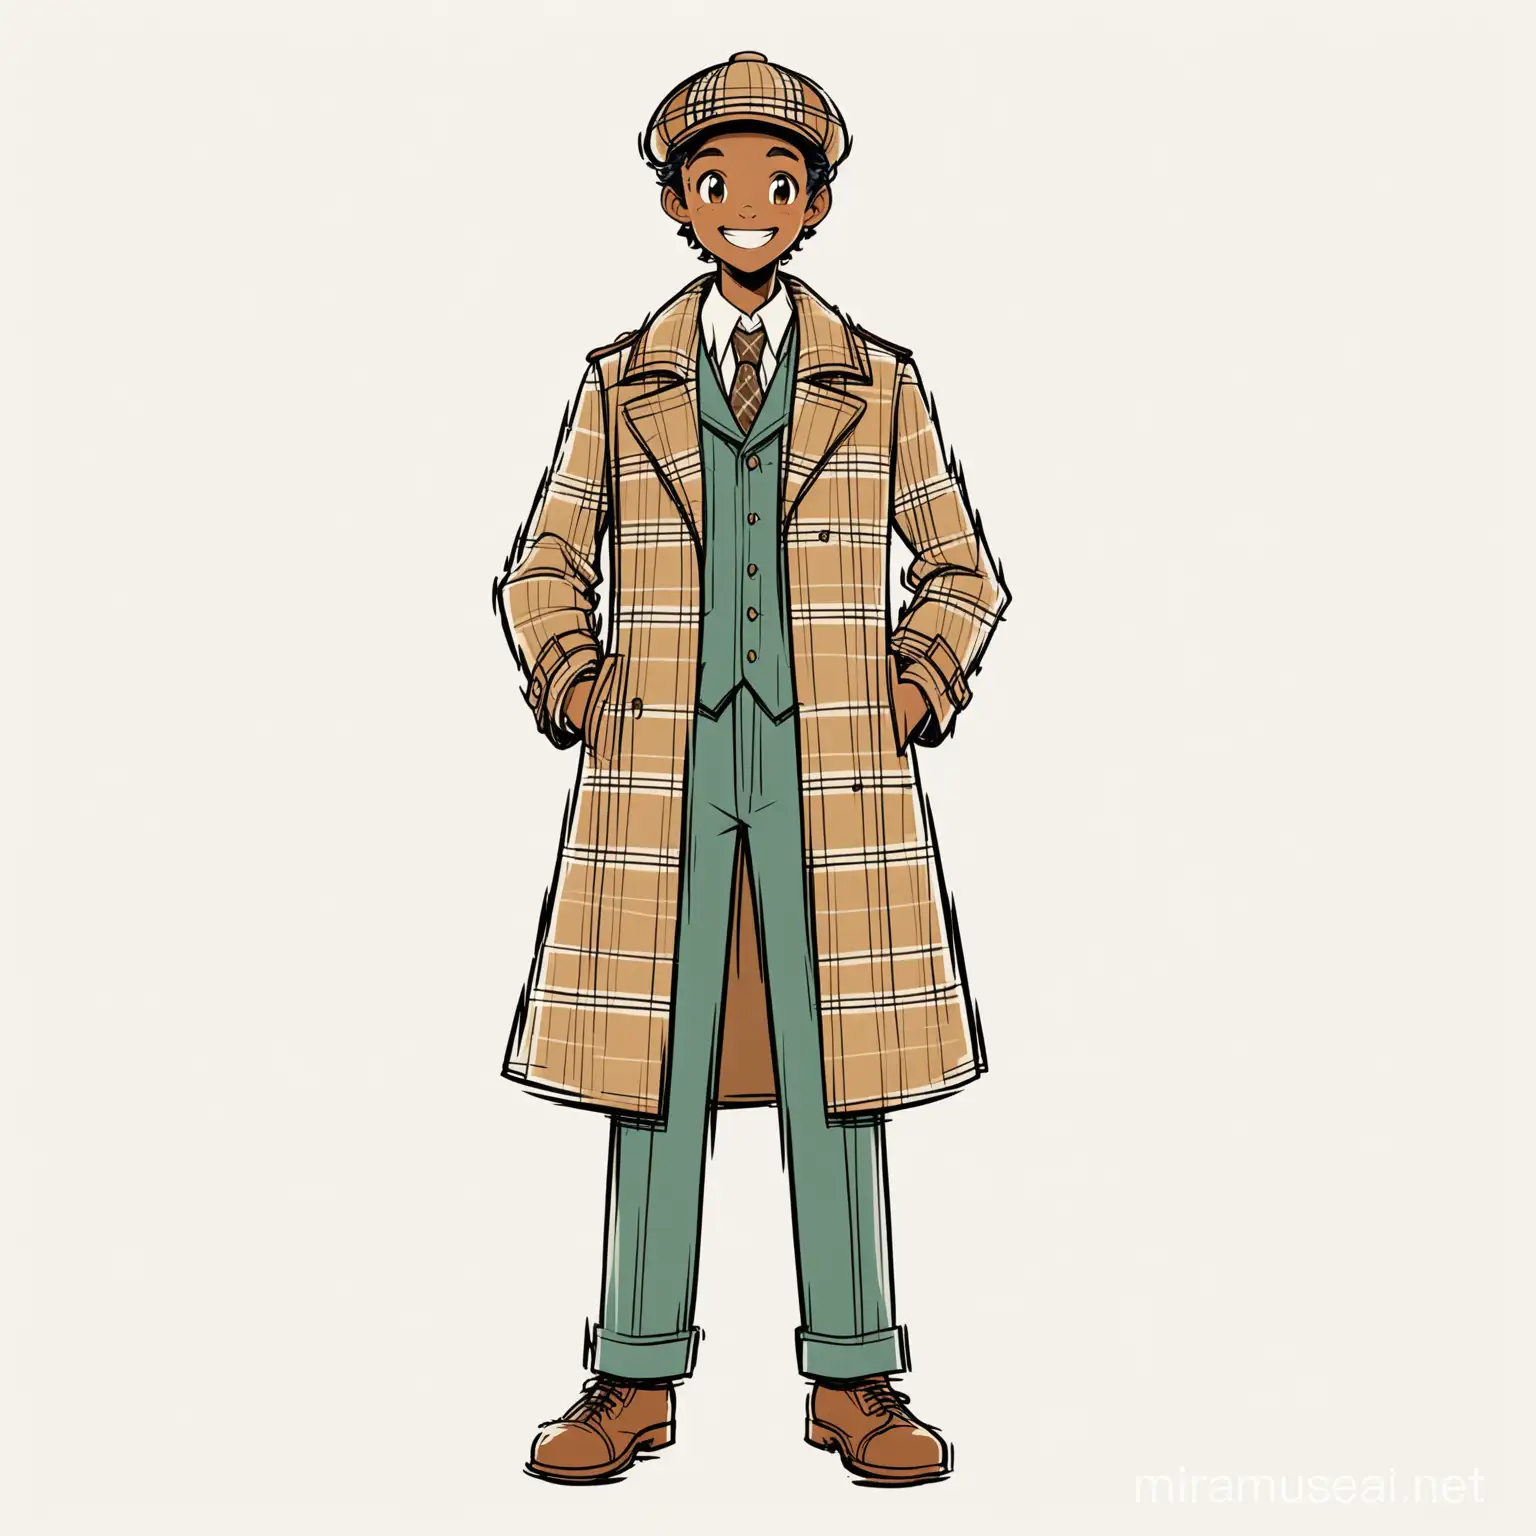 a full-body 2d drawing of a black teenage boy standing in the middle, wearing "Sherlock Holmes" deerstalker hat and a plaid trenchoat; facing ahead, smiling, on a plain white background, drawn in Disney style